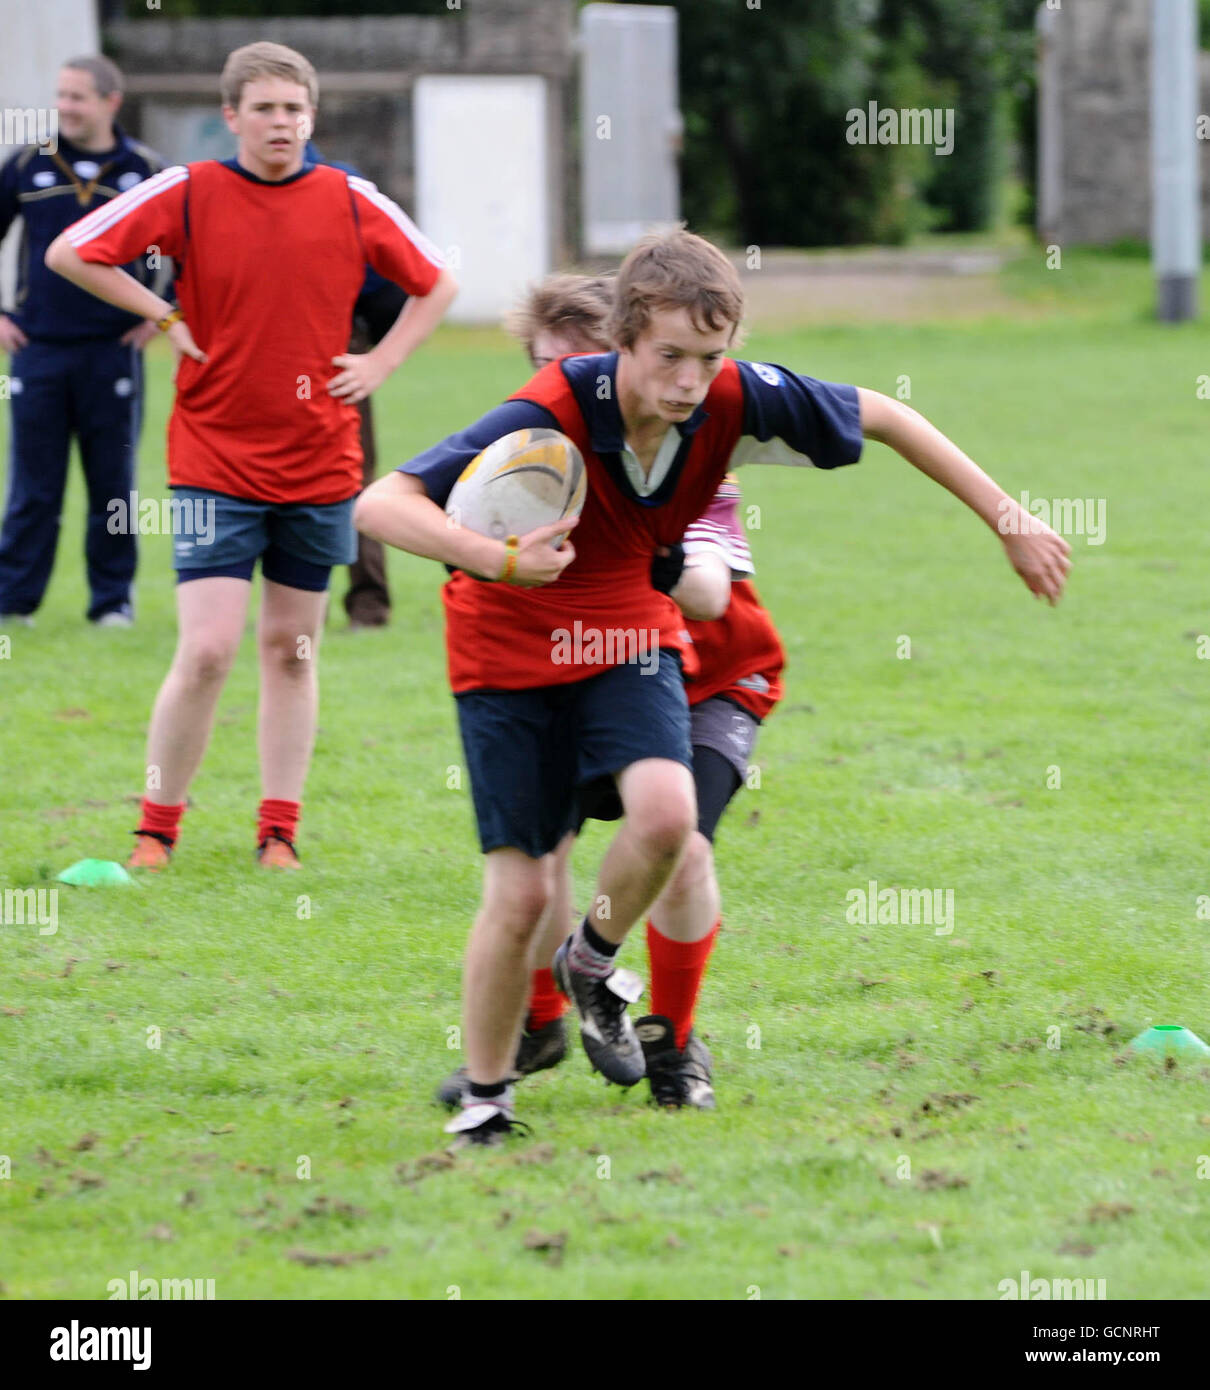 Rugby Union - Grampian School Rugby Goes for Gold - Aberdeen Grammar School Stock Photo